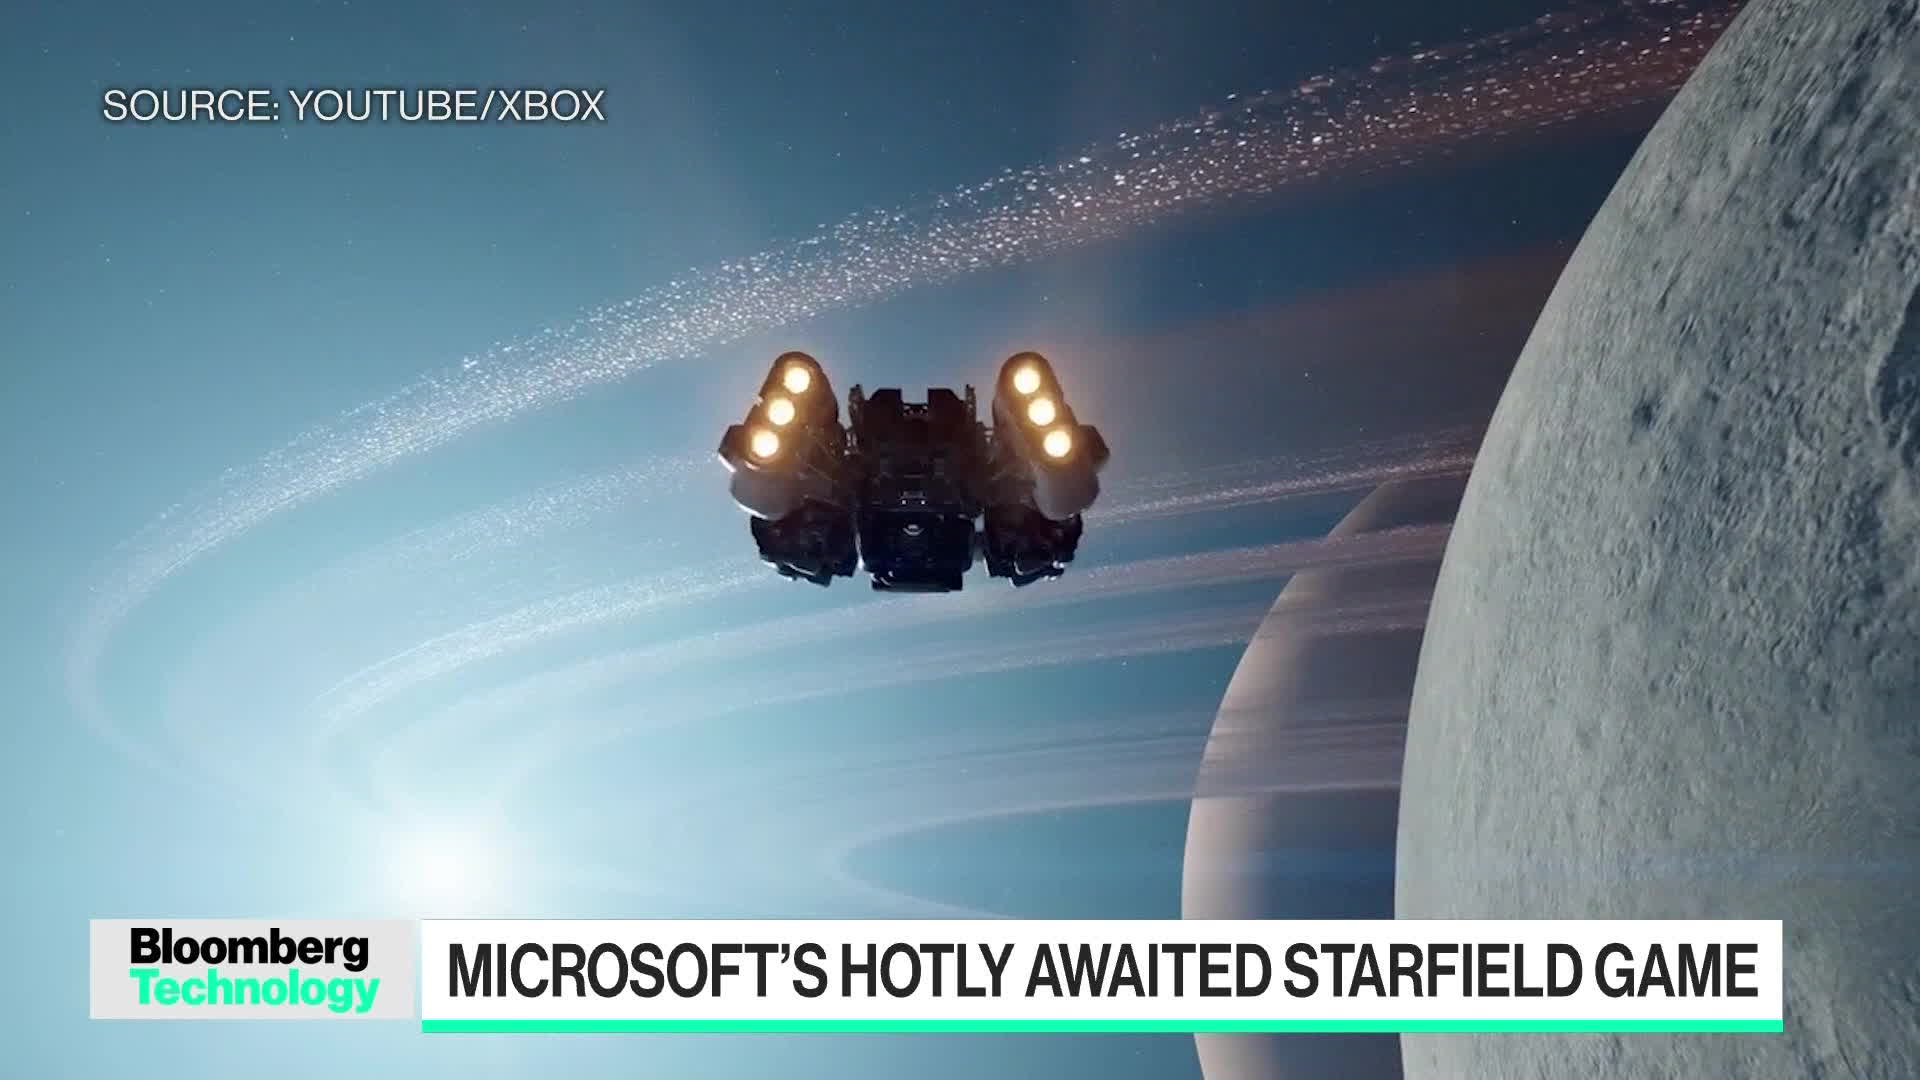 Phil Spencer wants Starfield to be a 12-year hit, just like Skyrim